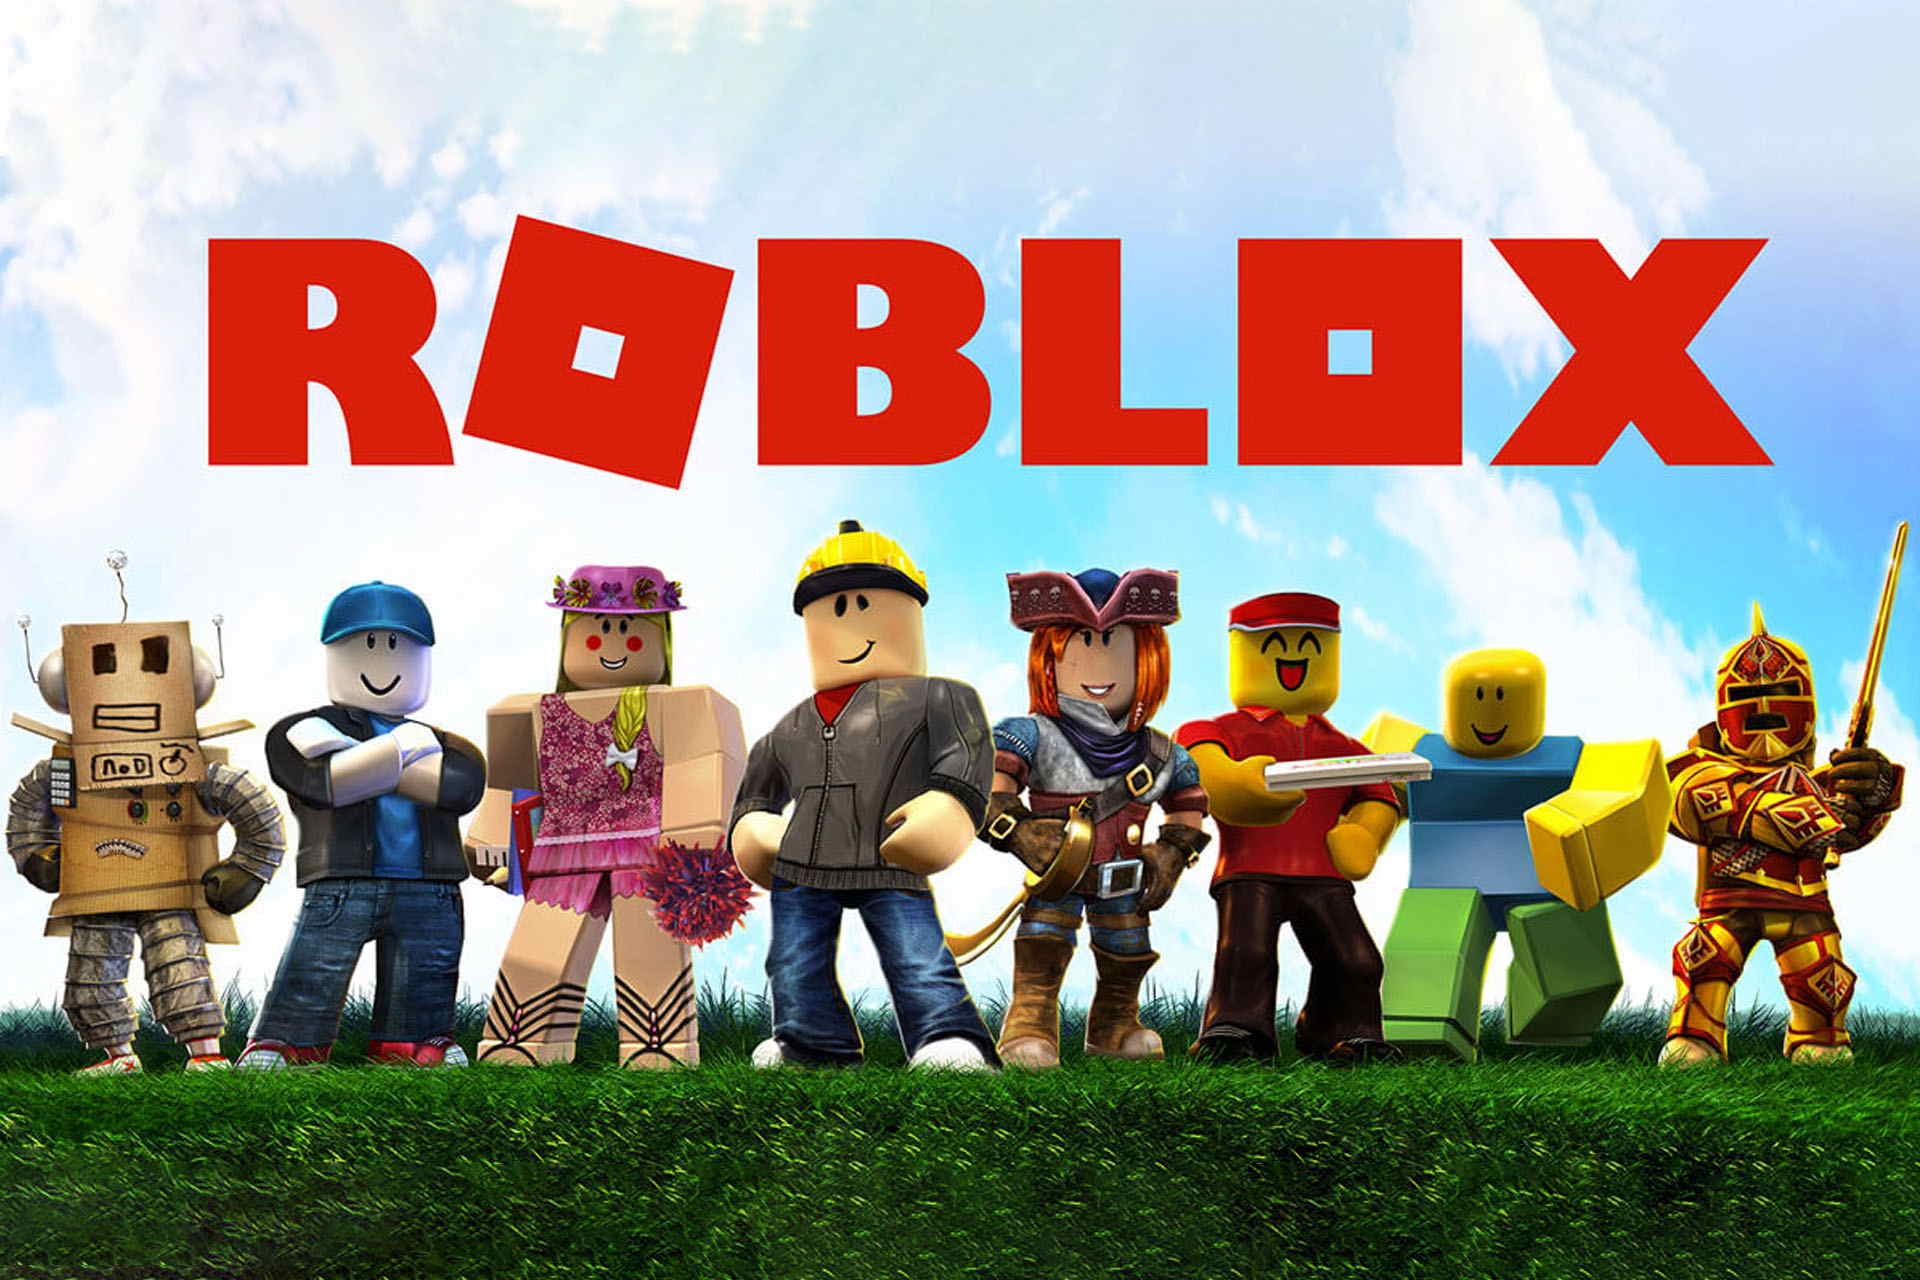 5 Alternative Games Like Roblox To Play Online - a game just like roblox